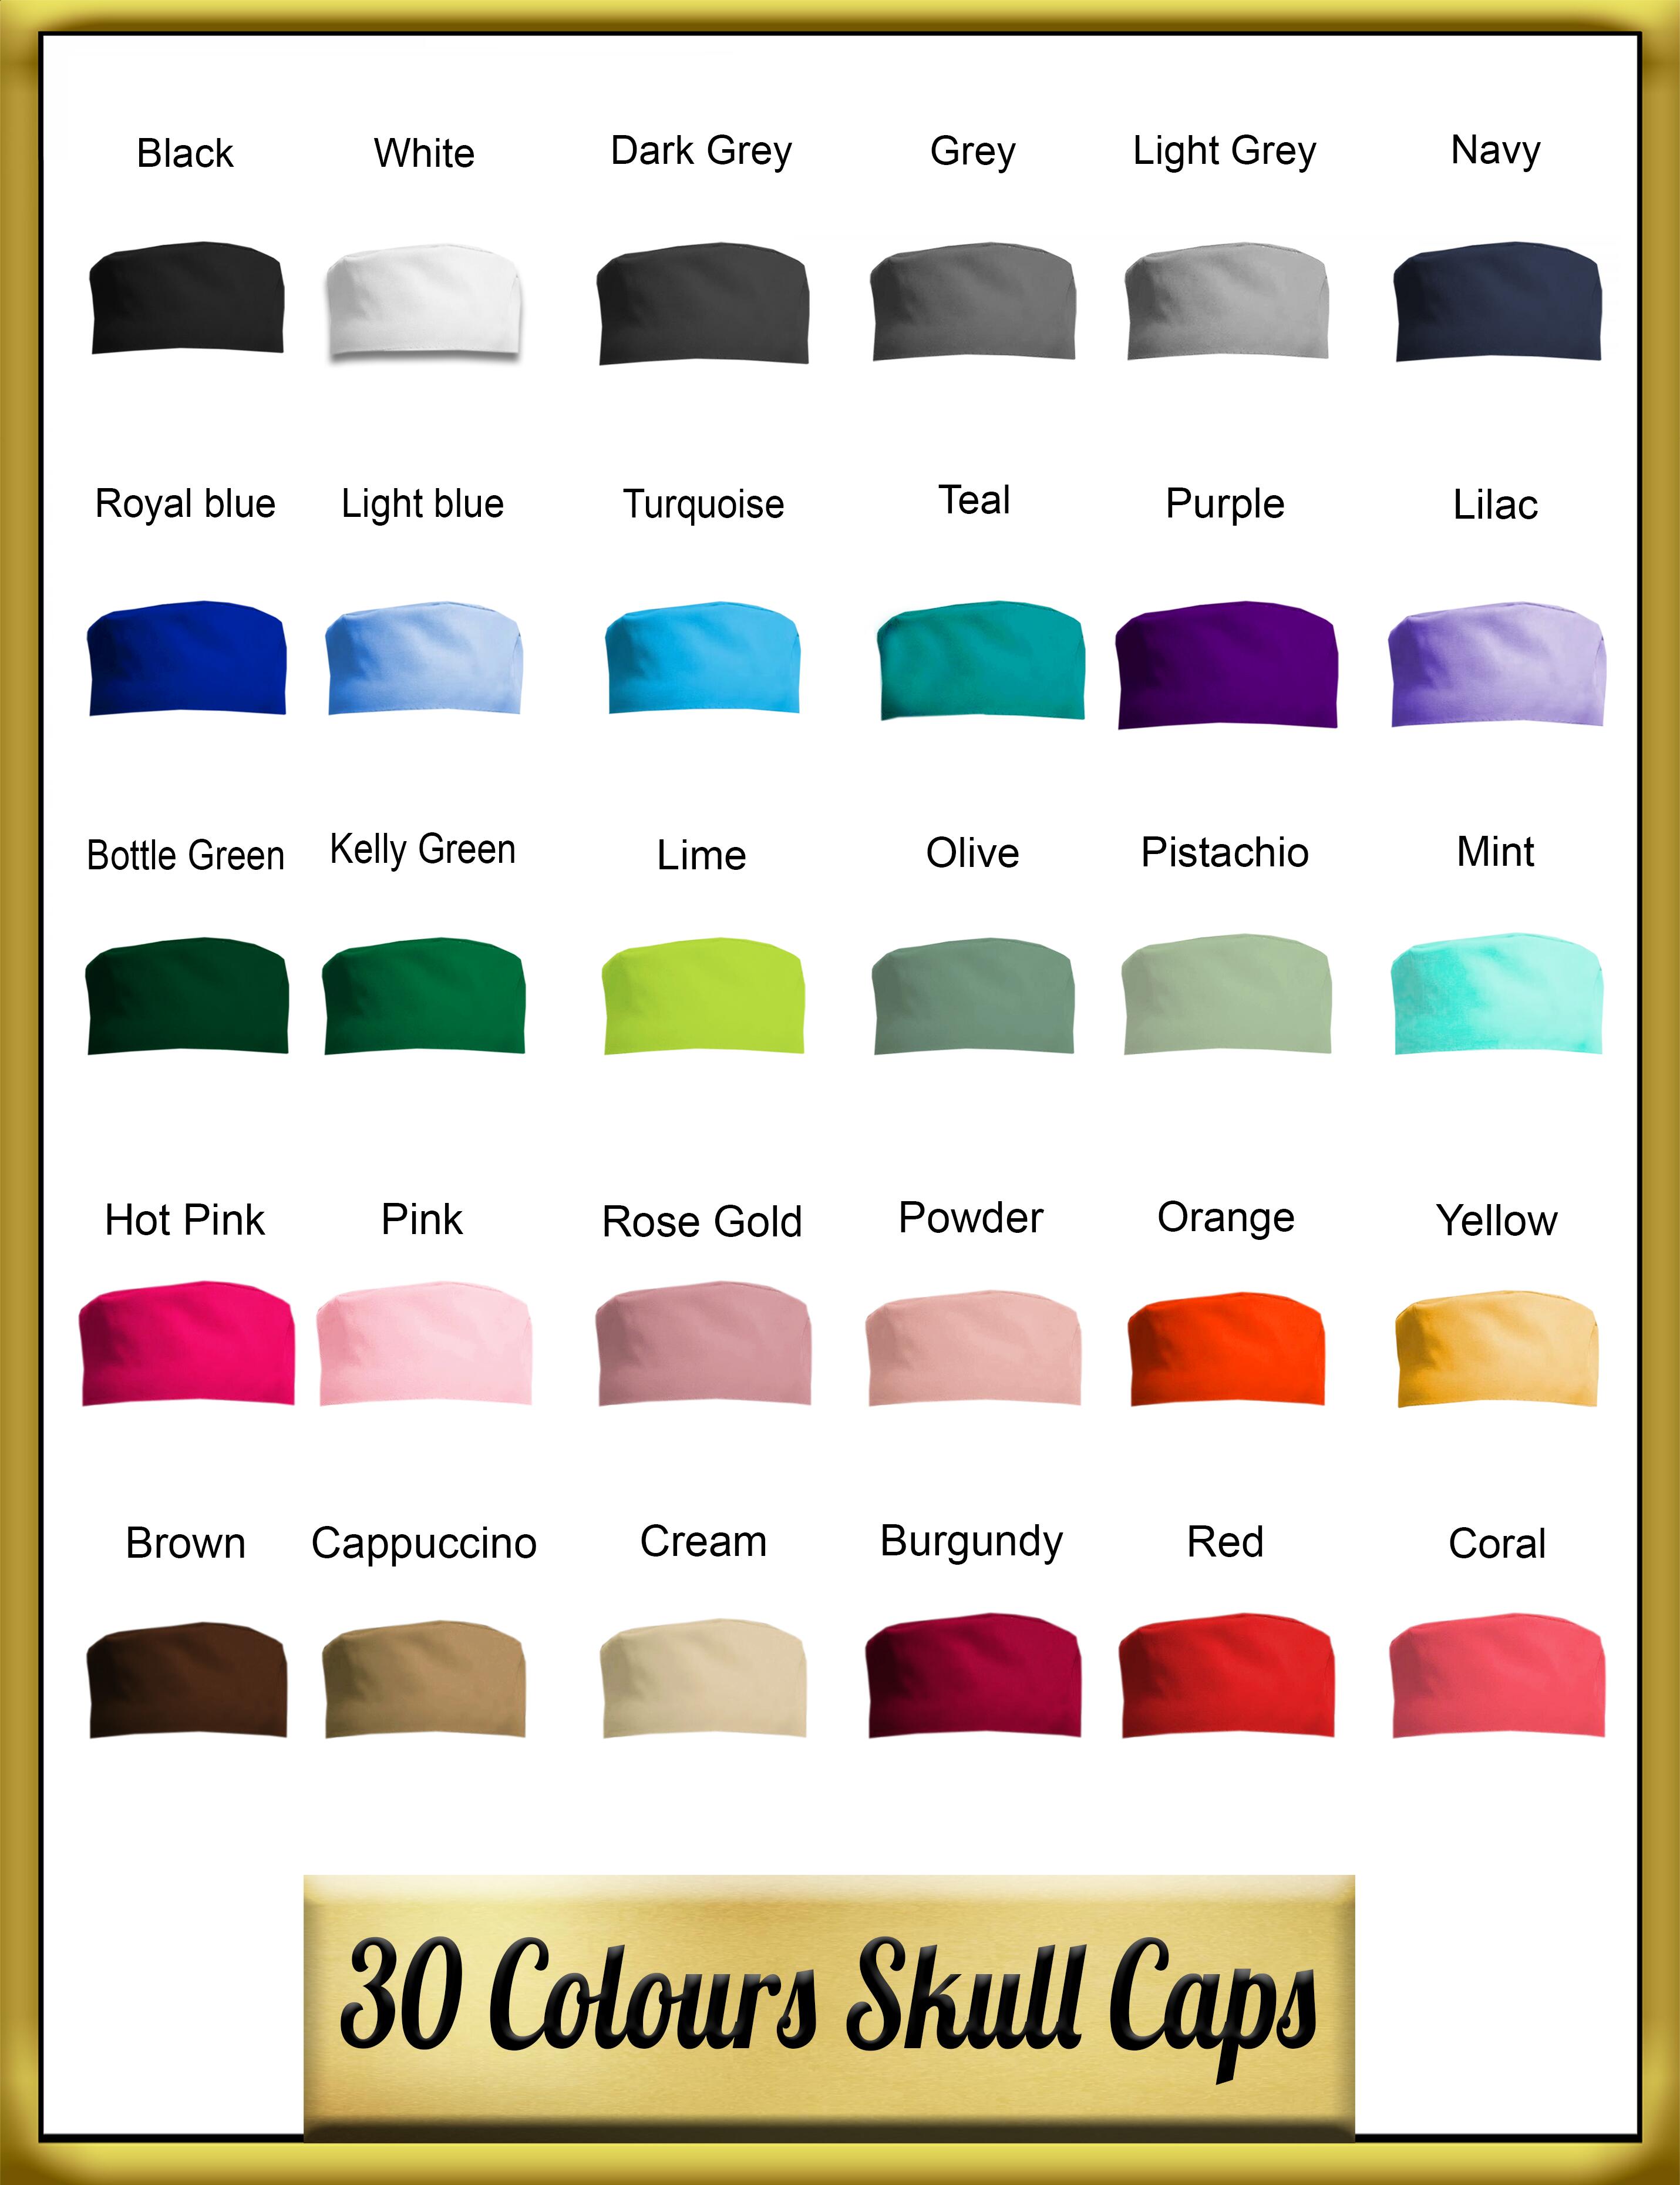 Personalised skull caps in 30 colours